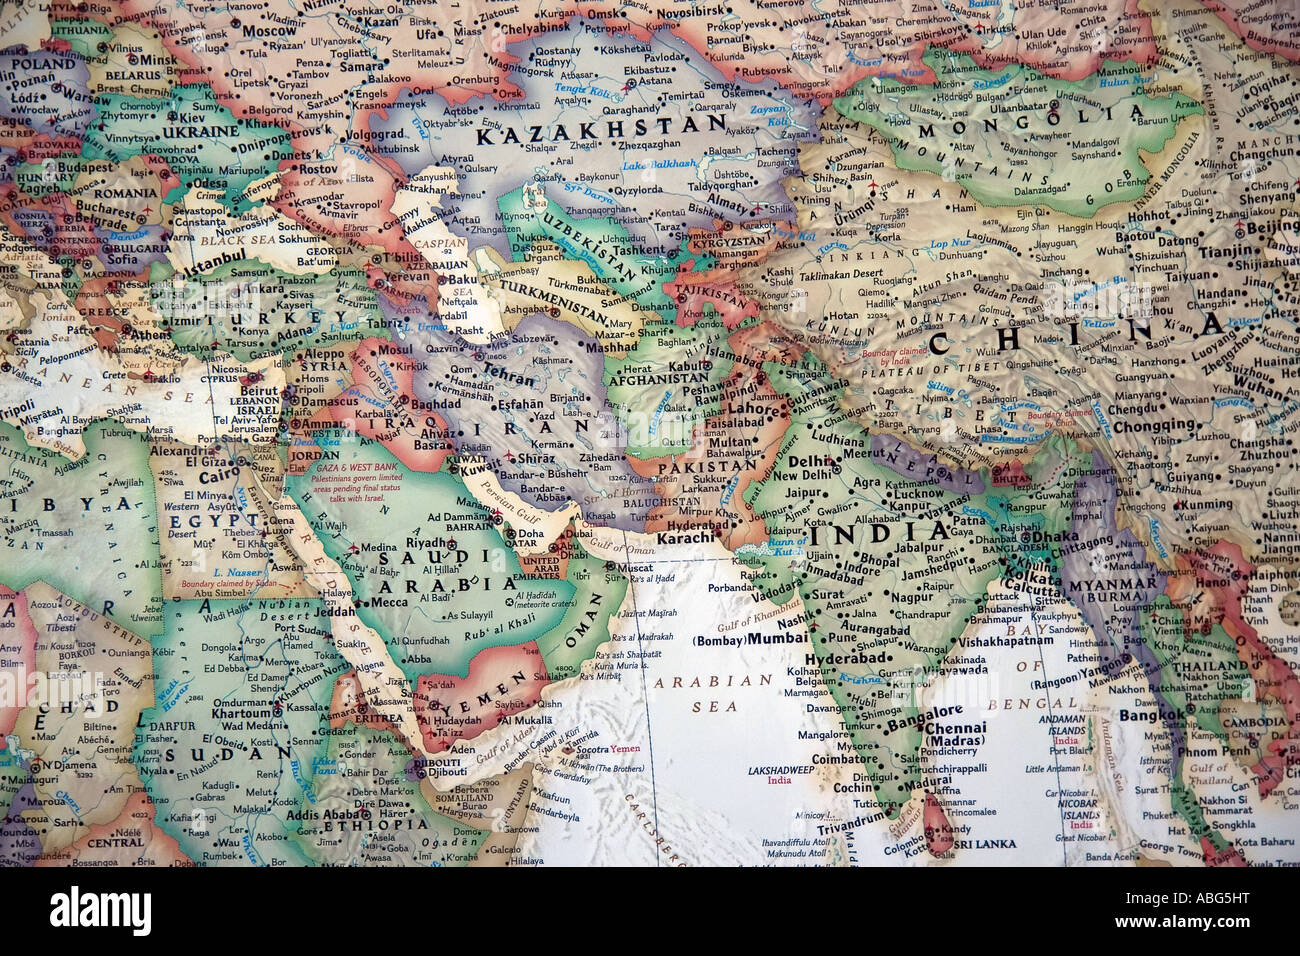 A view covering many nations, including China, the Middle East and Africa on a fine, detailed and colorful World map. Stock Photo